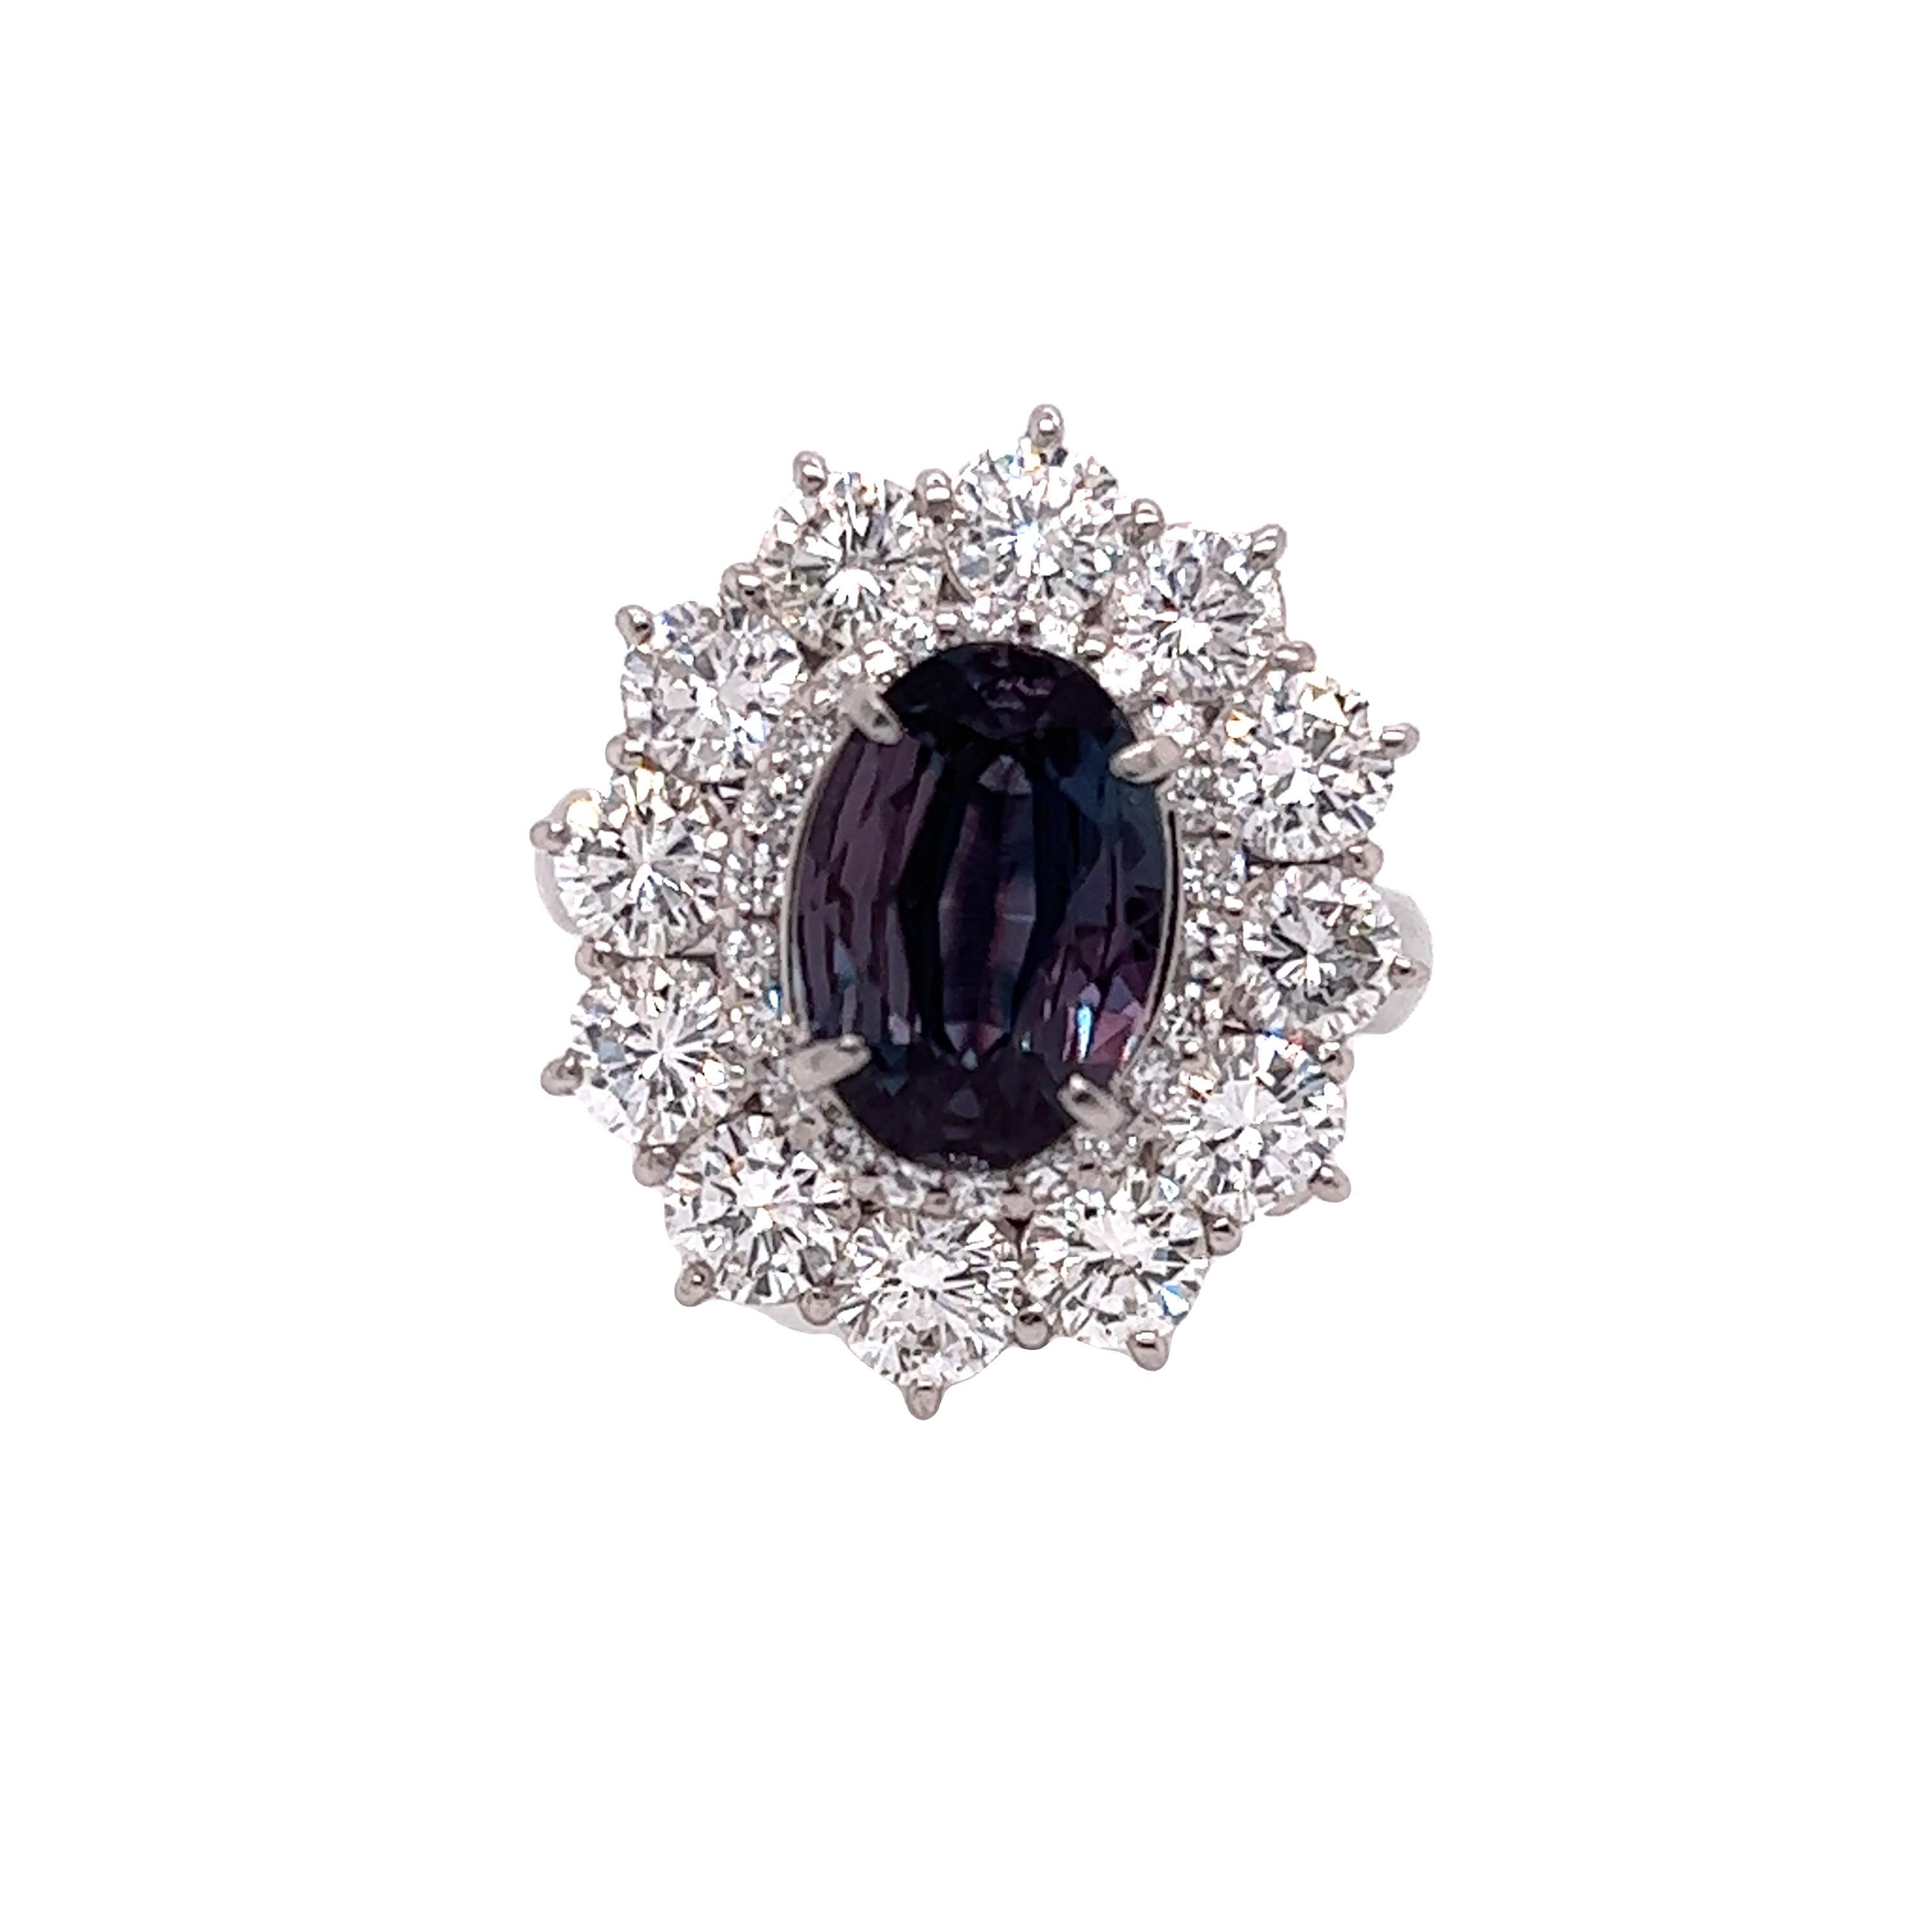 This is a gorgeous natural AAA quality oval Alexandrite surrounded by dainty diamonds that is set in a vintage platinum setting. This ring features a natural 2.16 carat oval alexandrite that is certified by the Gemological Institute of America (GIA)